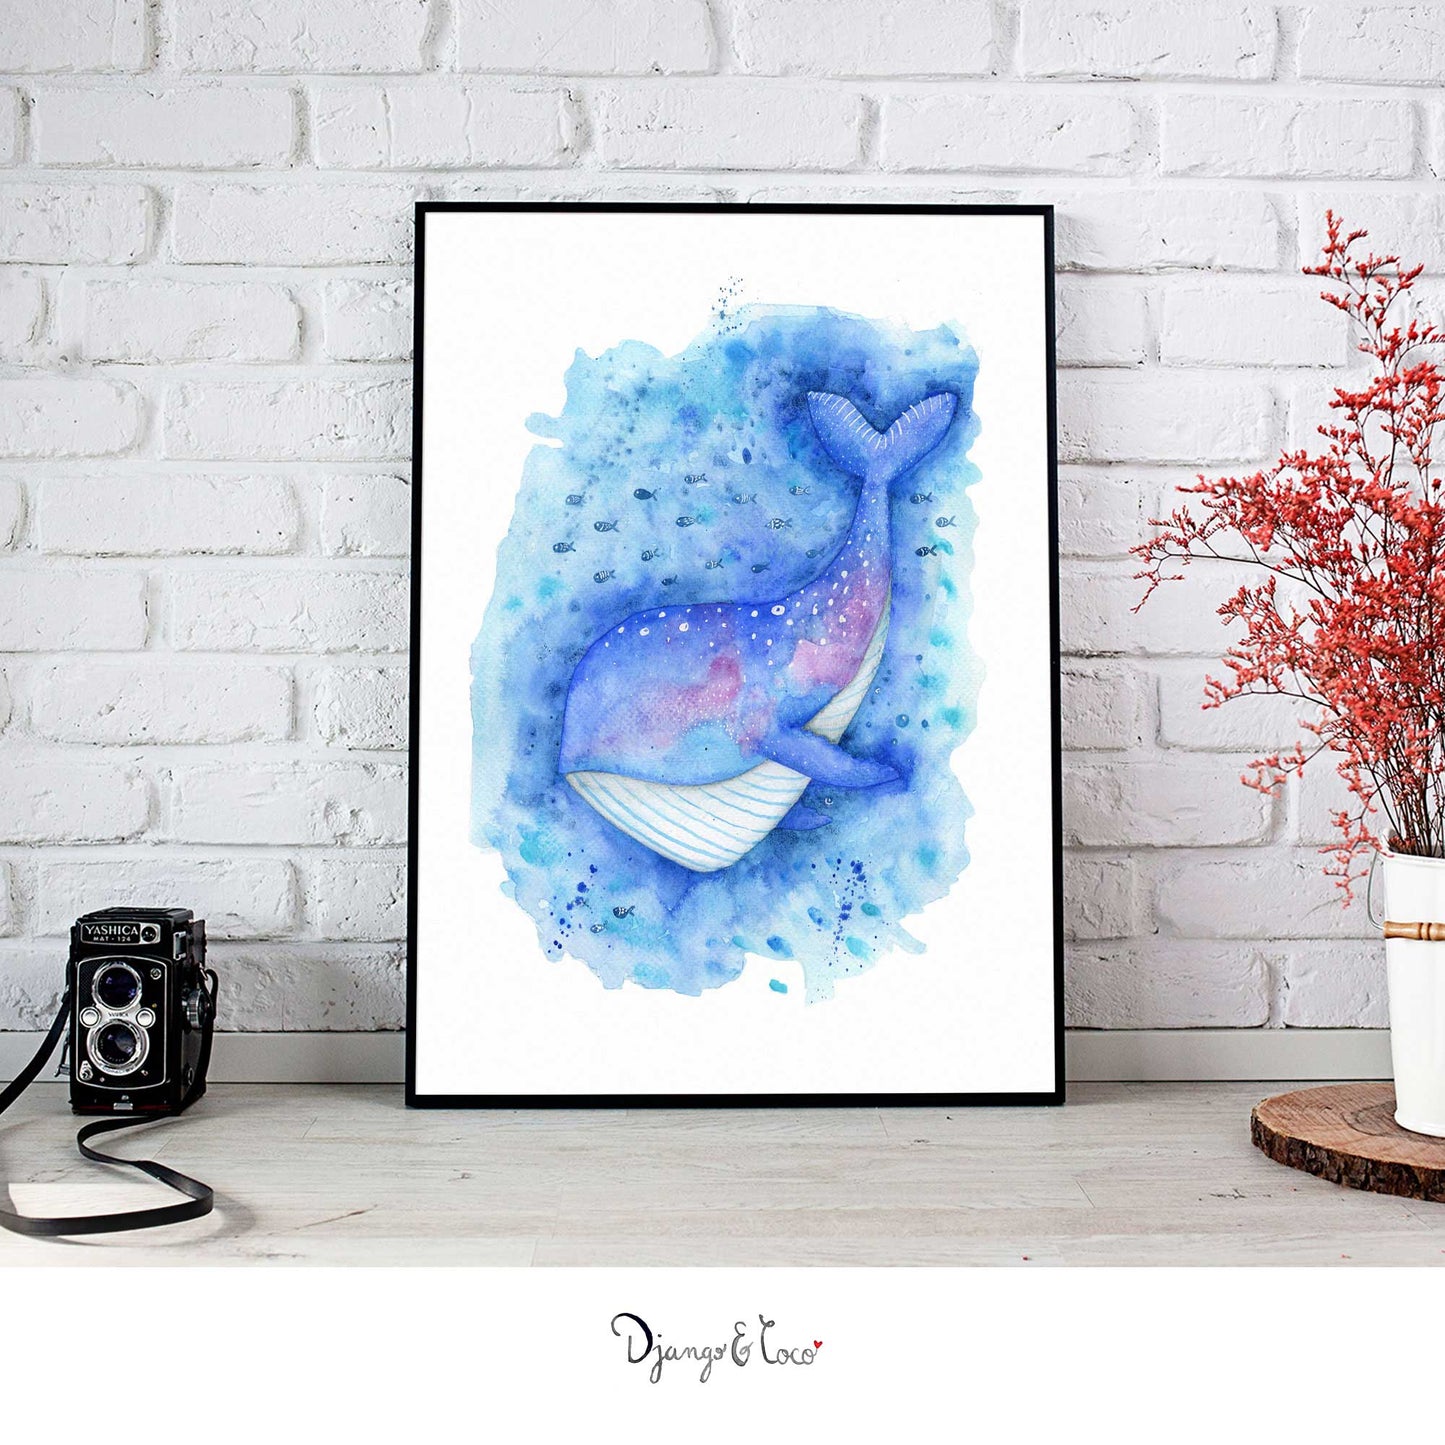 blue whale framed art and flowers